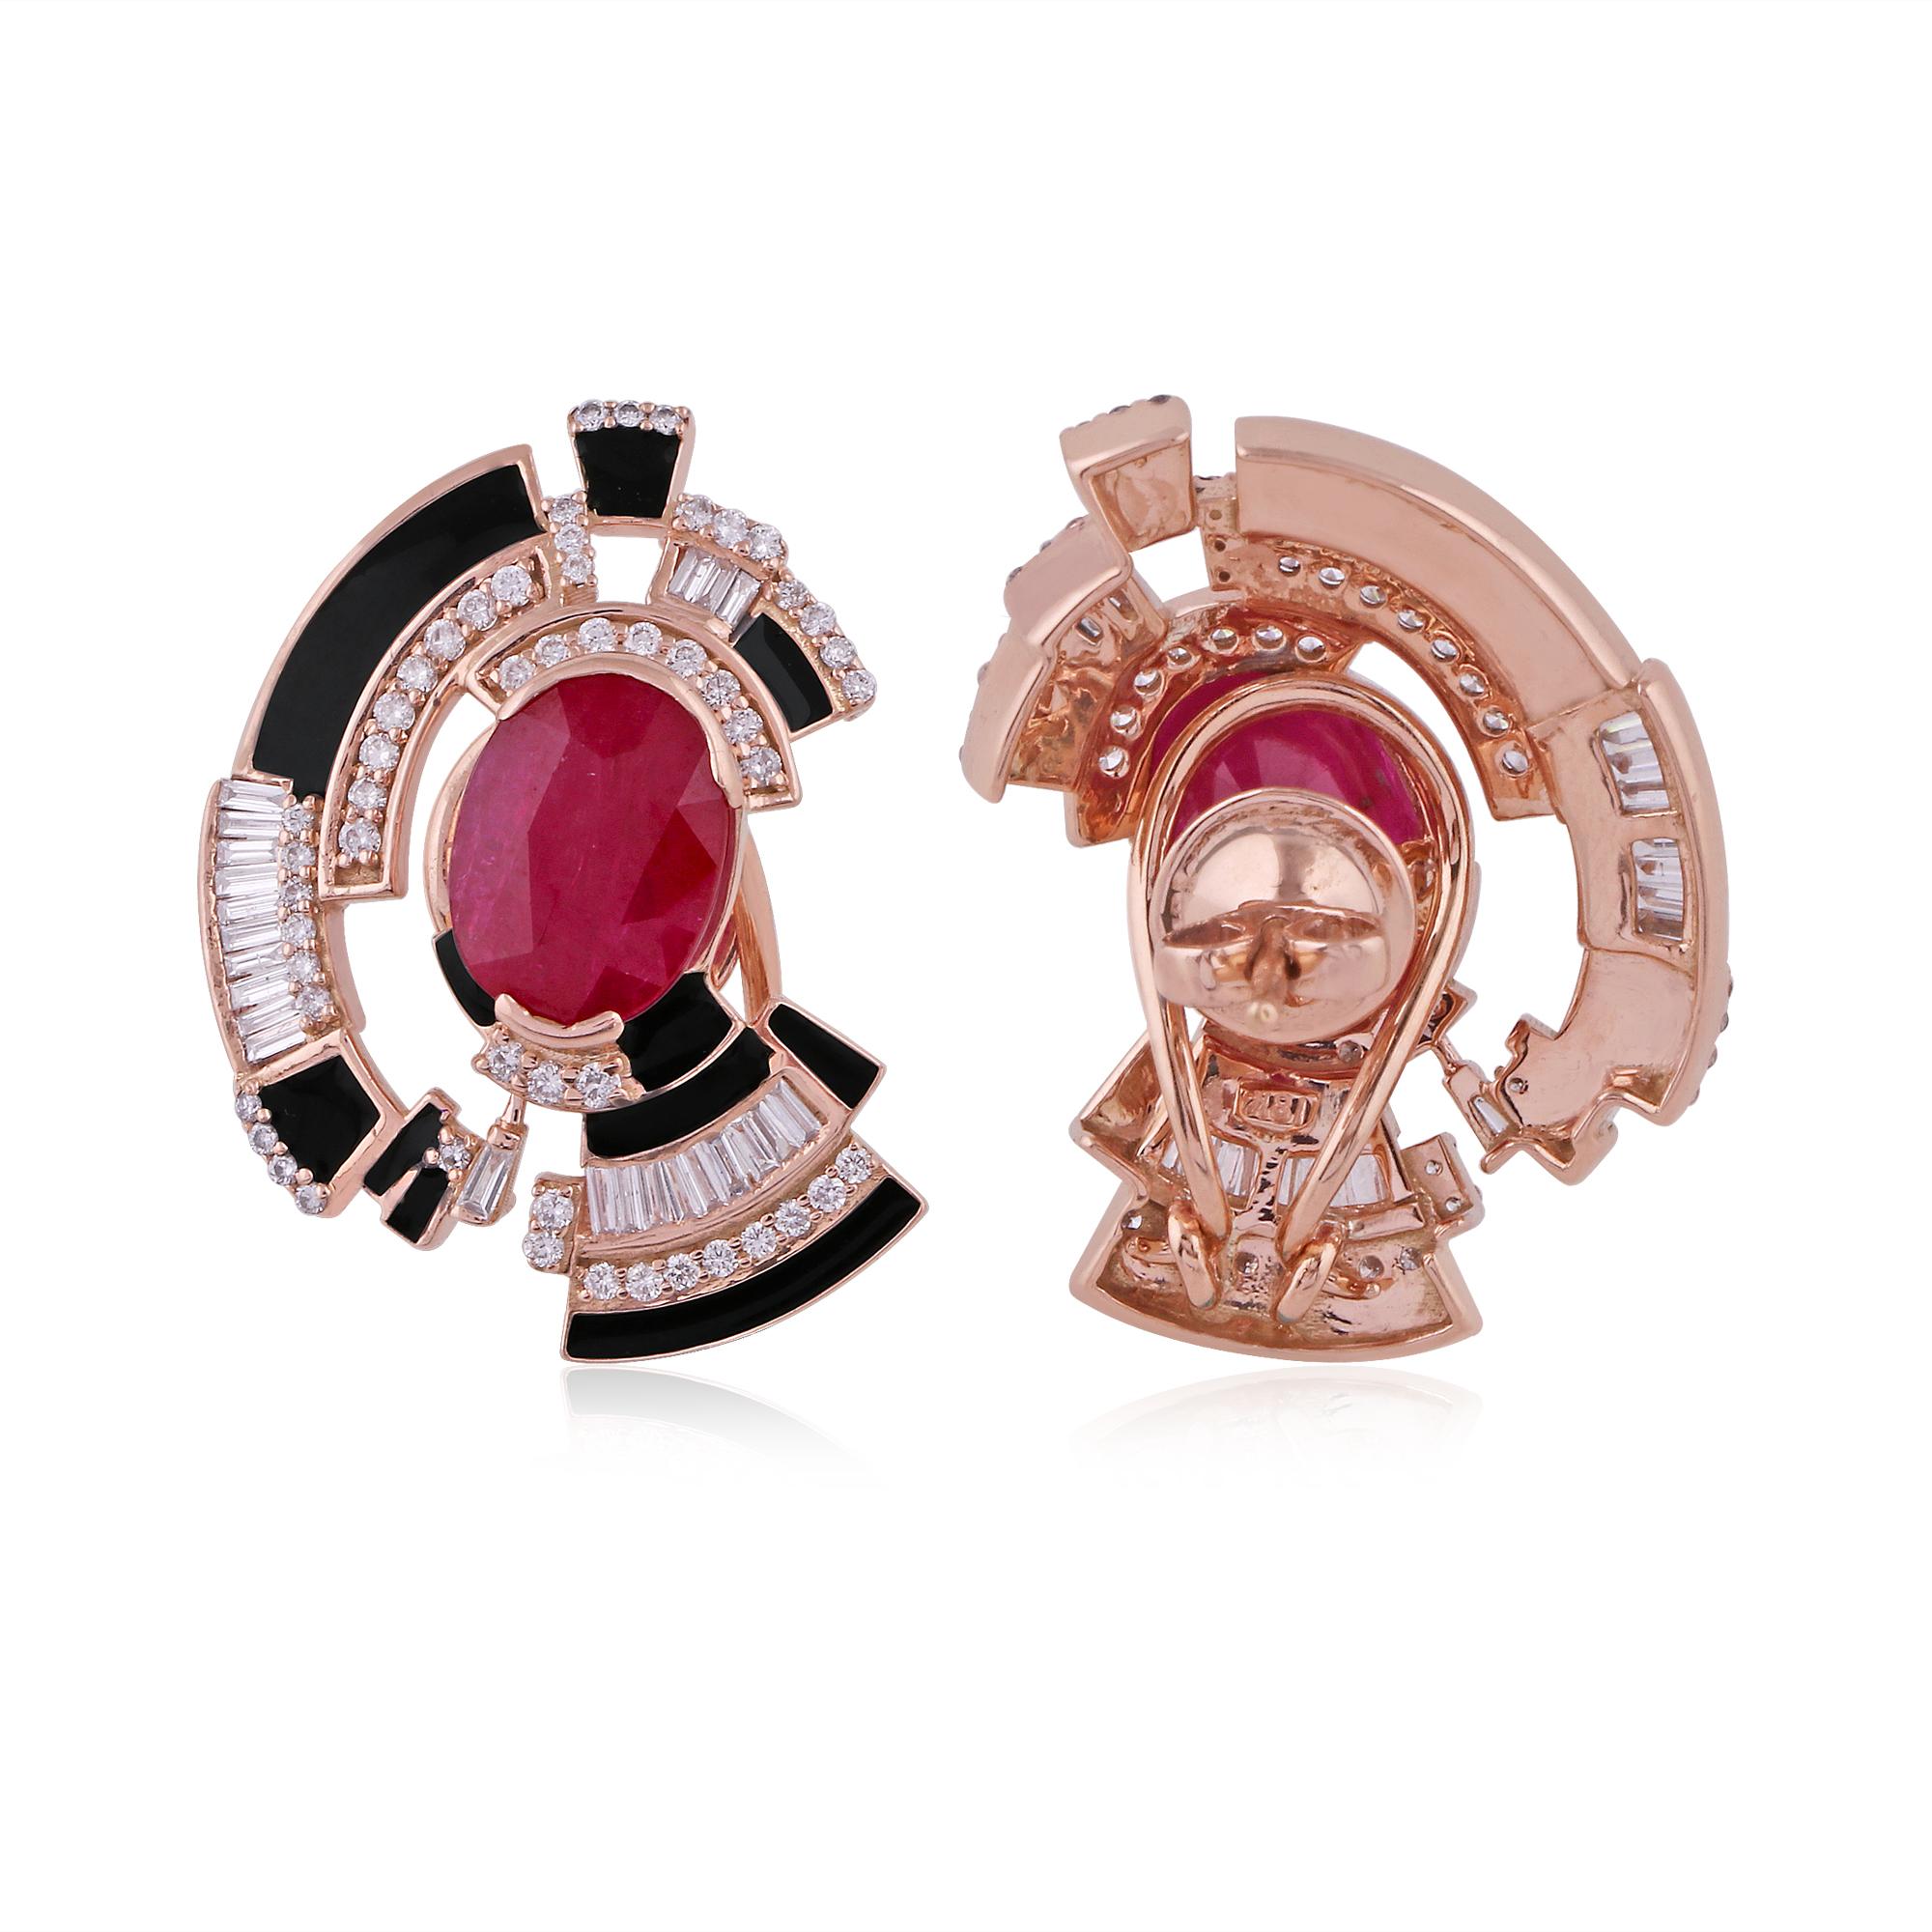 Item Code:- SEE-1020 (14k)
Gross Weight :- 10.88 gm
14k Solid Rose Gold Weight :- 9.77 gm
Natural Diamond Wt :- 0.11 ct.  ( AVERAGE DIAMOND CLARITY SI1-SI2 & COLOR H-I )
Real Ruby Wt :- 5.45 ct.
Earrings Size :- 27x19 mm approx.

✦